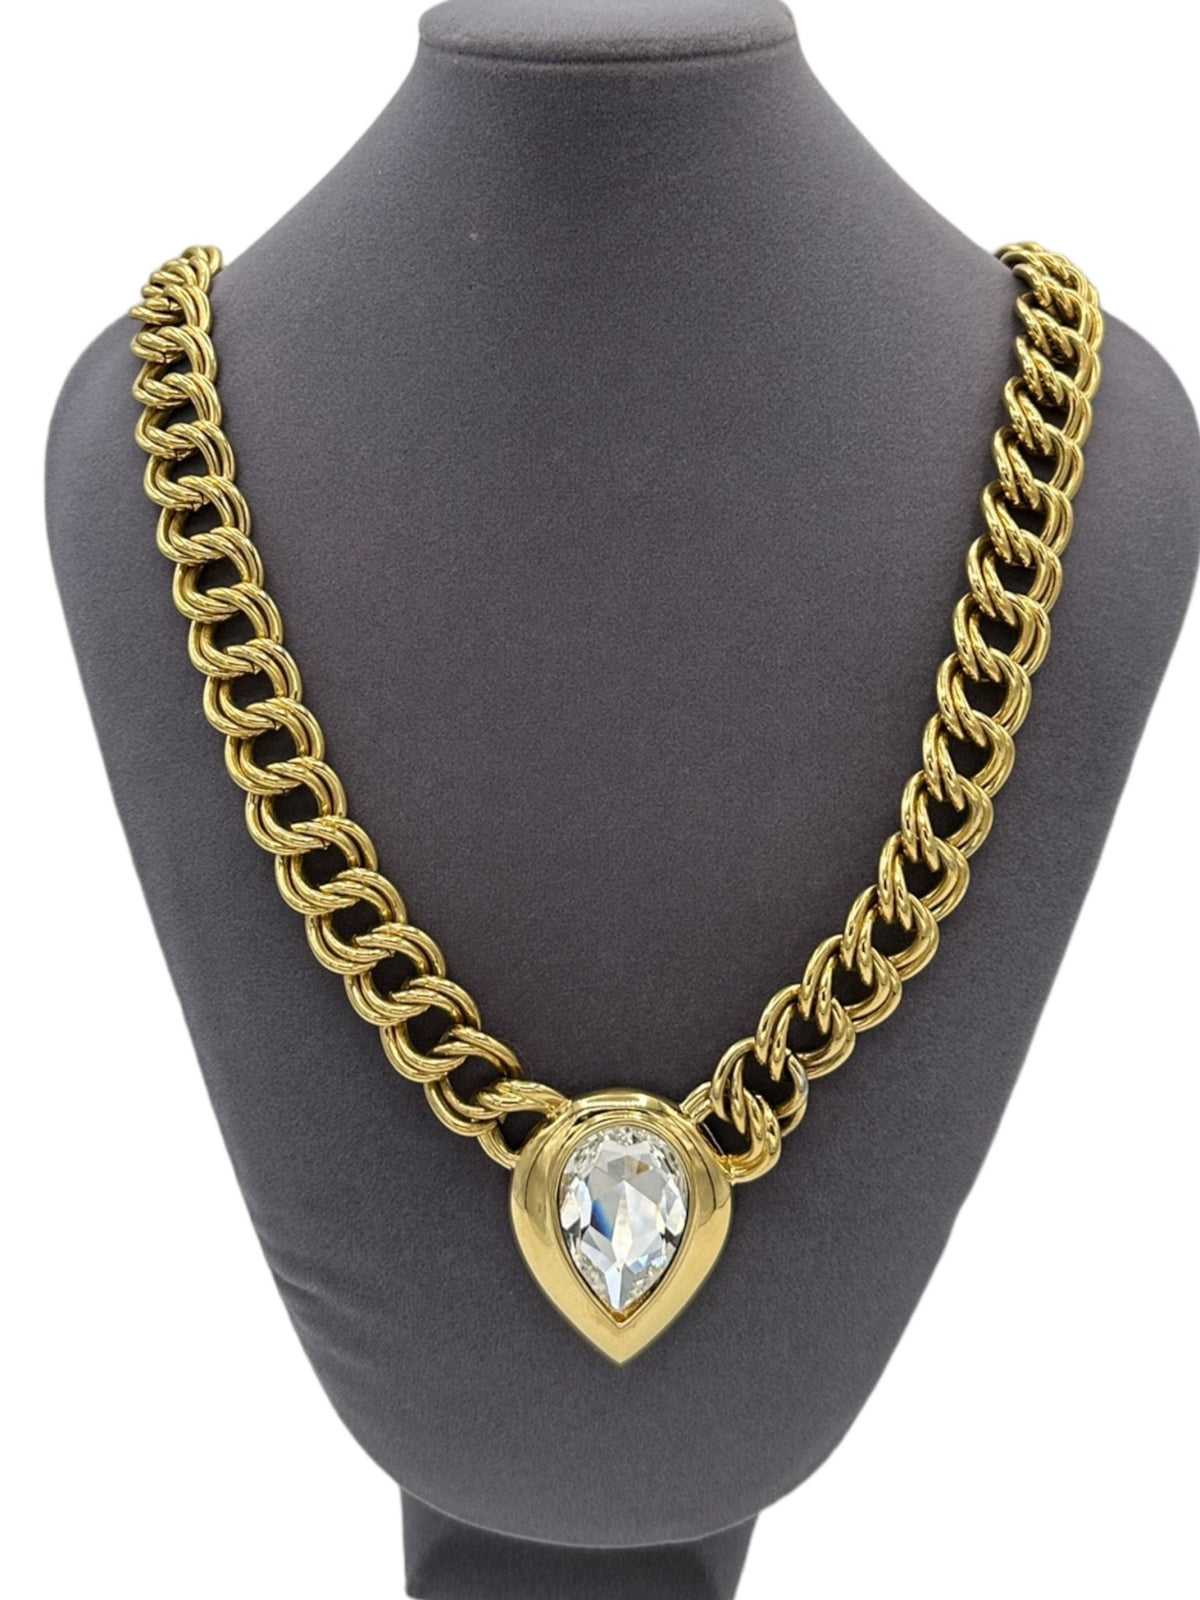 Napier Nightlights Double Gold Chain Large Rhinestone Vintage Pendant - 24 Wishes Vintage Jewelry